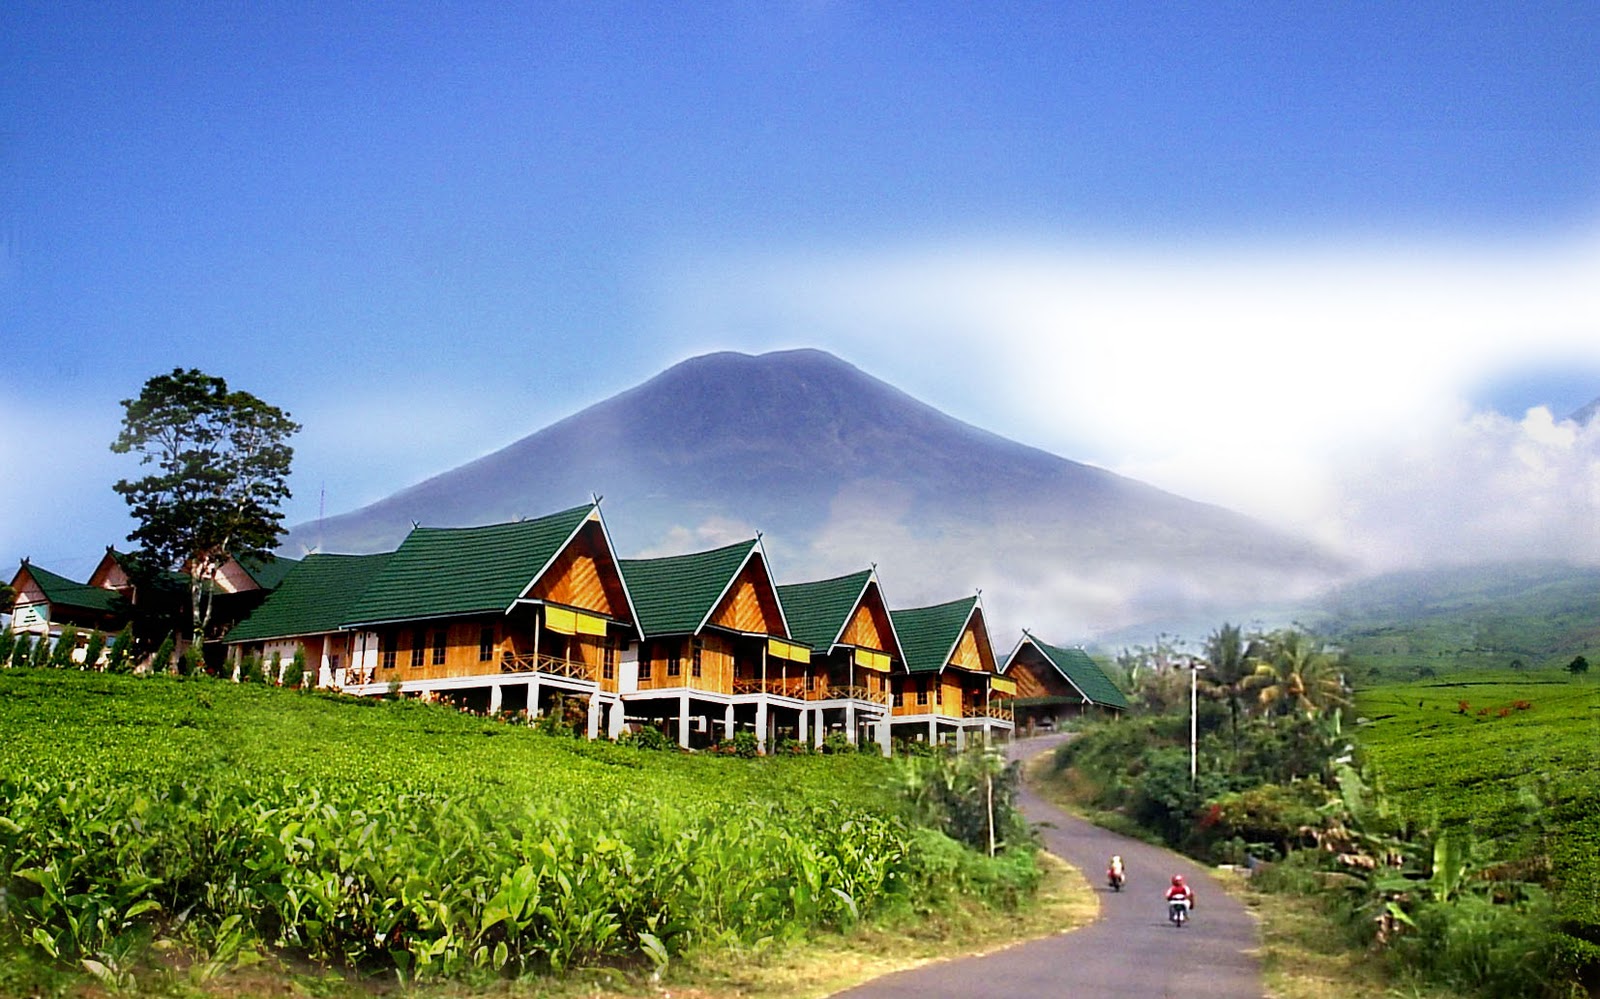 Mount Dempo is the highest mountain in South Sumatera - South Sumatera